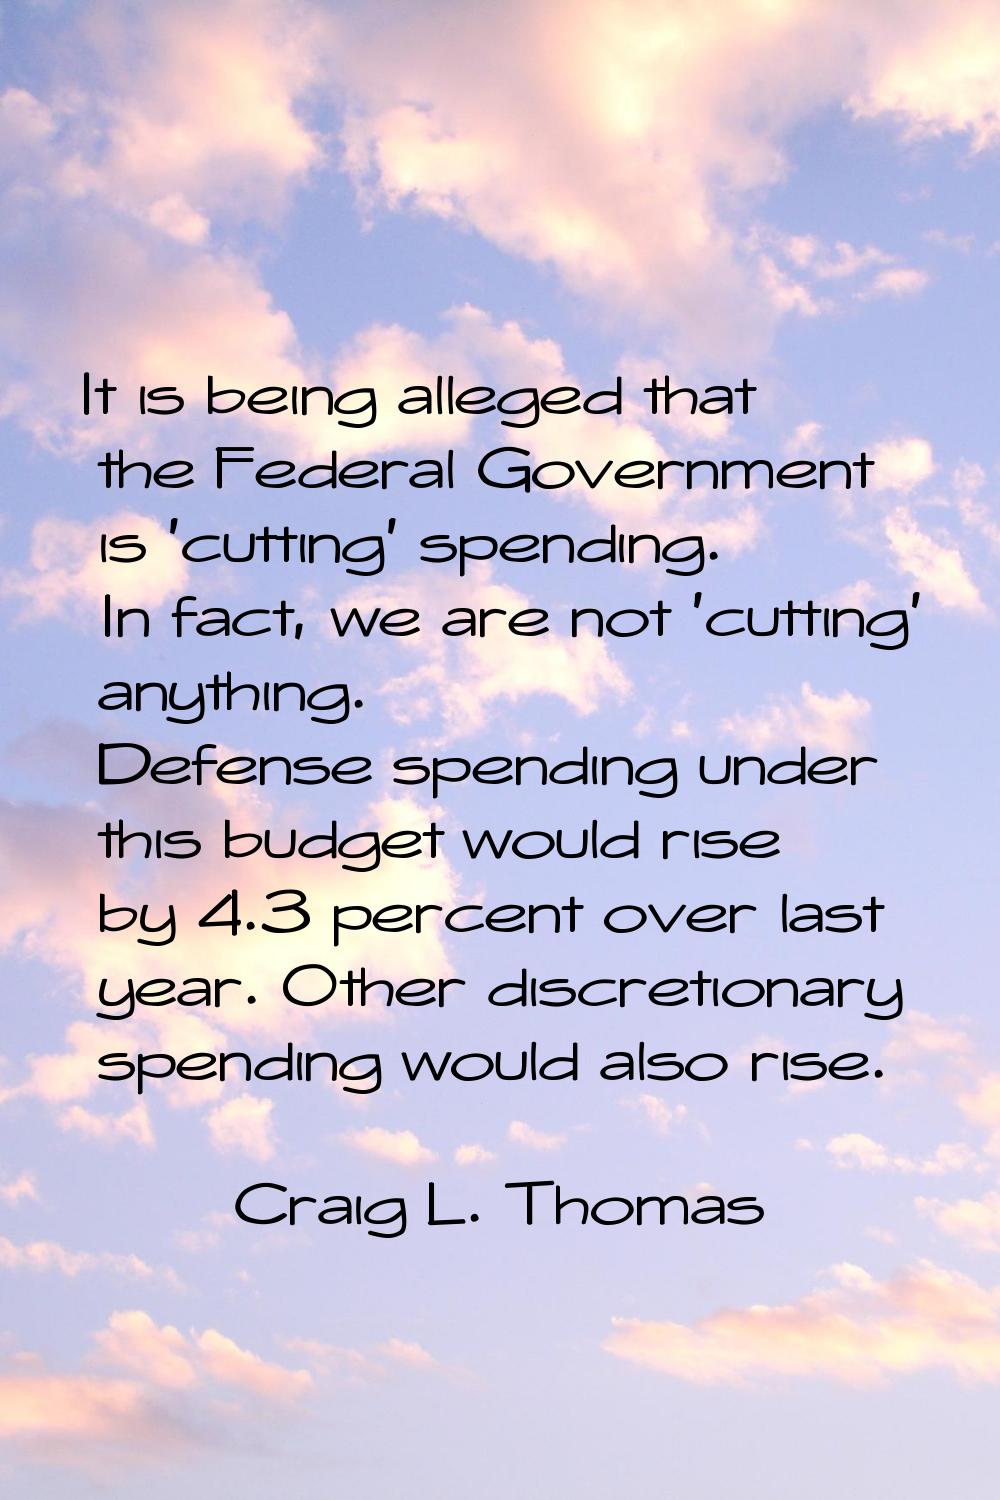 It is being alleged that the Federal Government is 'cutting' spending. In fact, we are not 'cutting